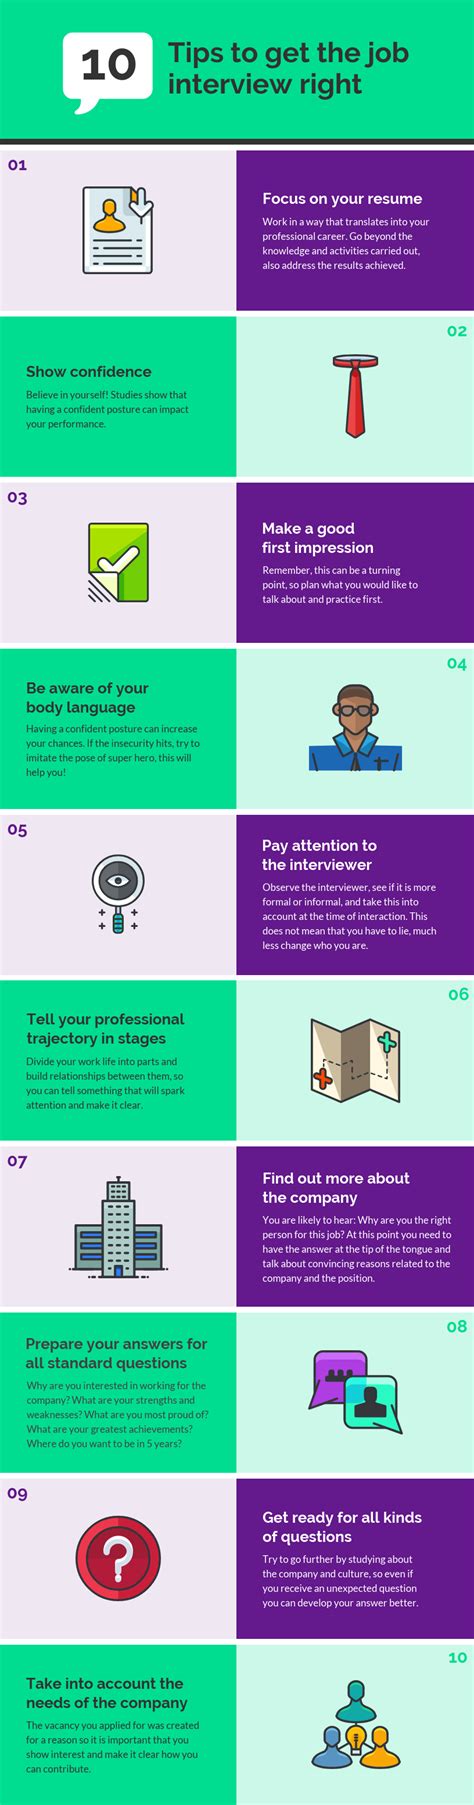 10 Job Interview Tips Infographic - Venngage